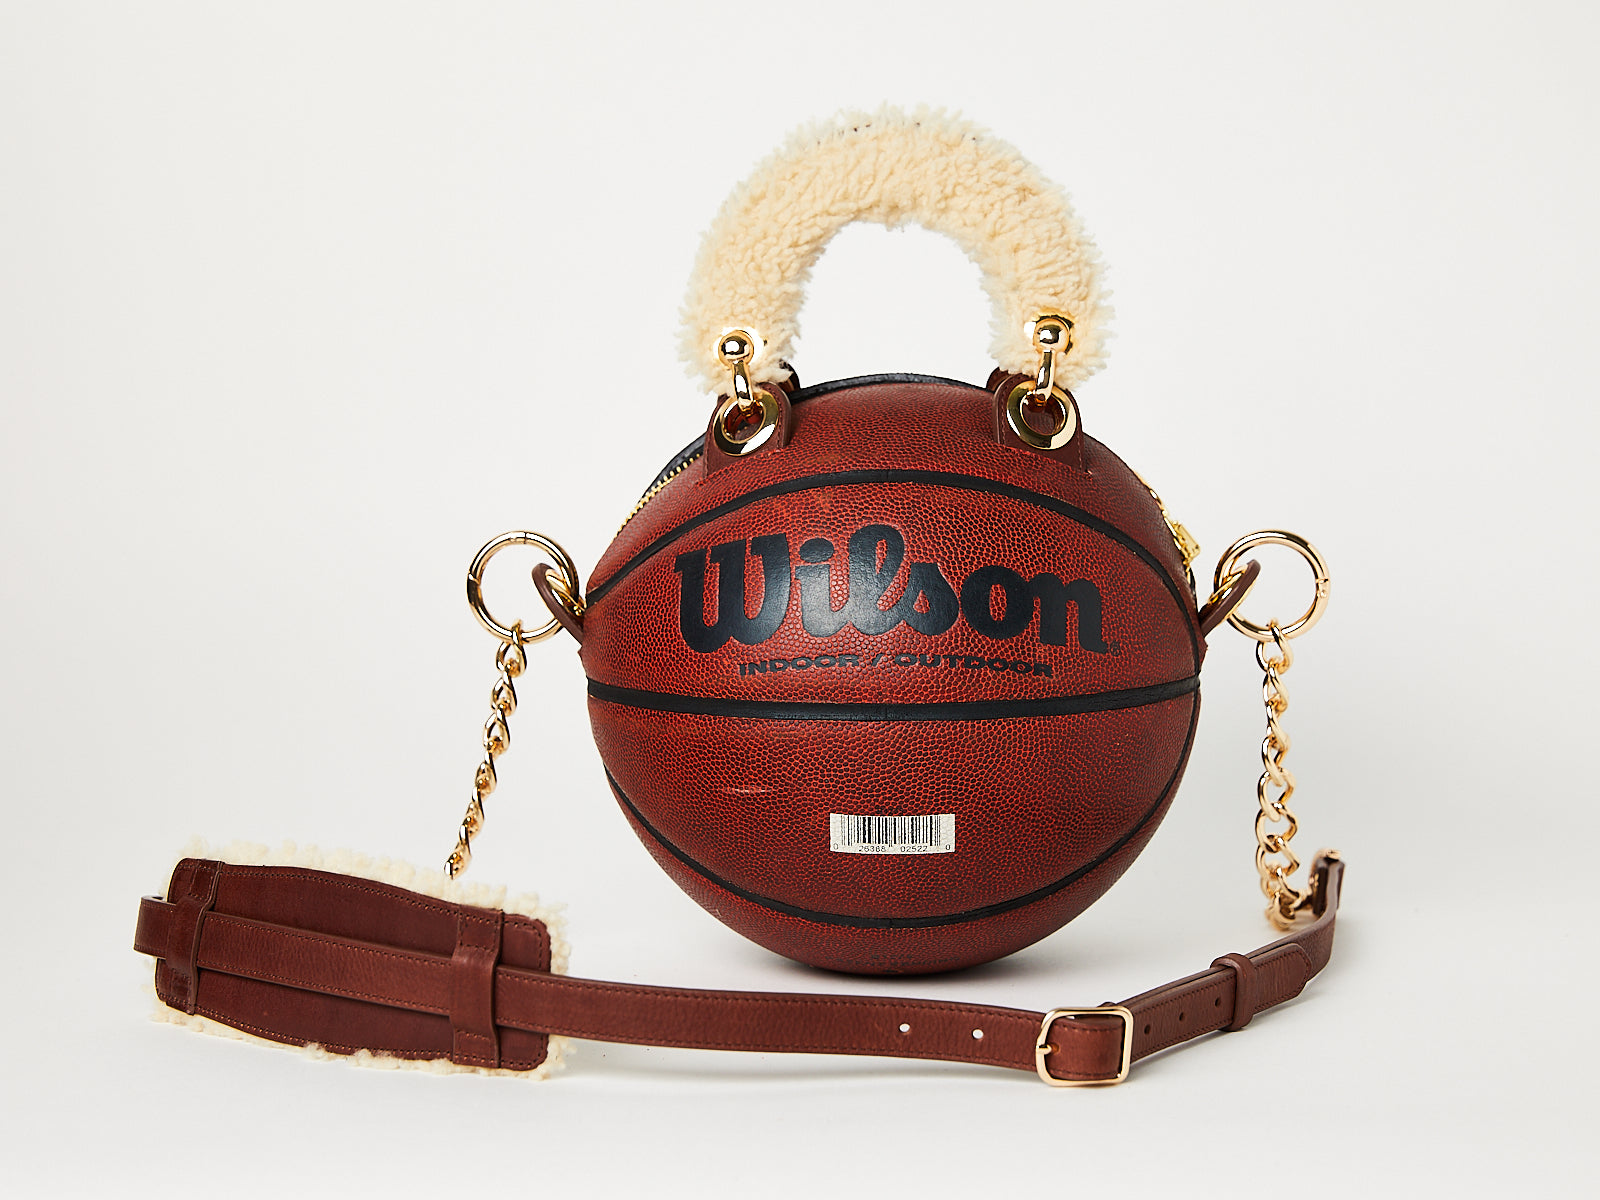 Louis Vuitton NBA Collection Ball in Basket Leather Bag Brown